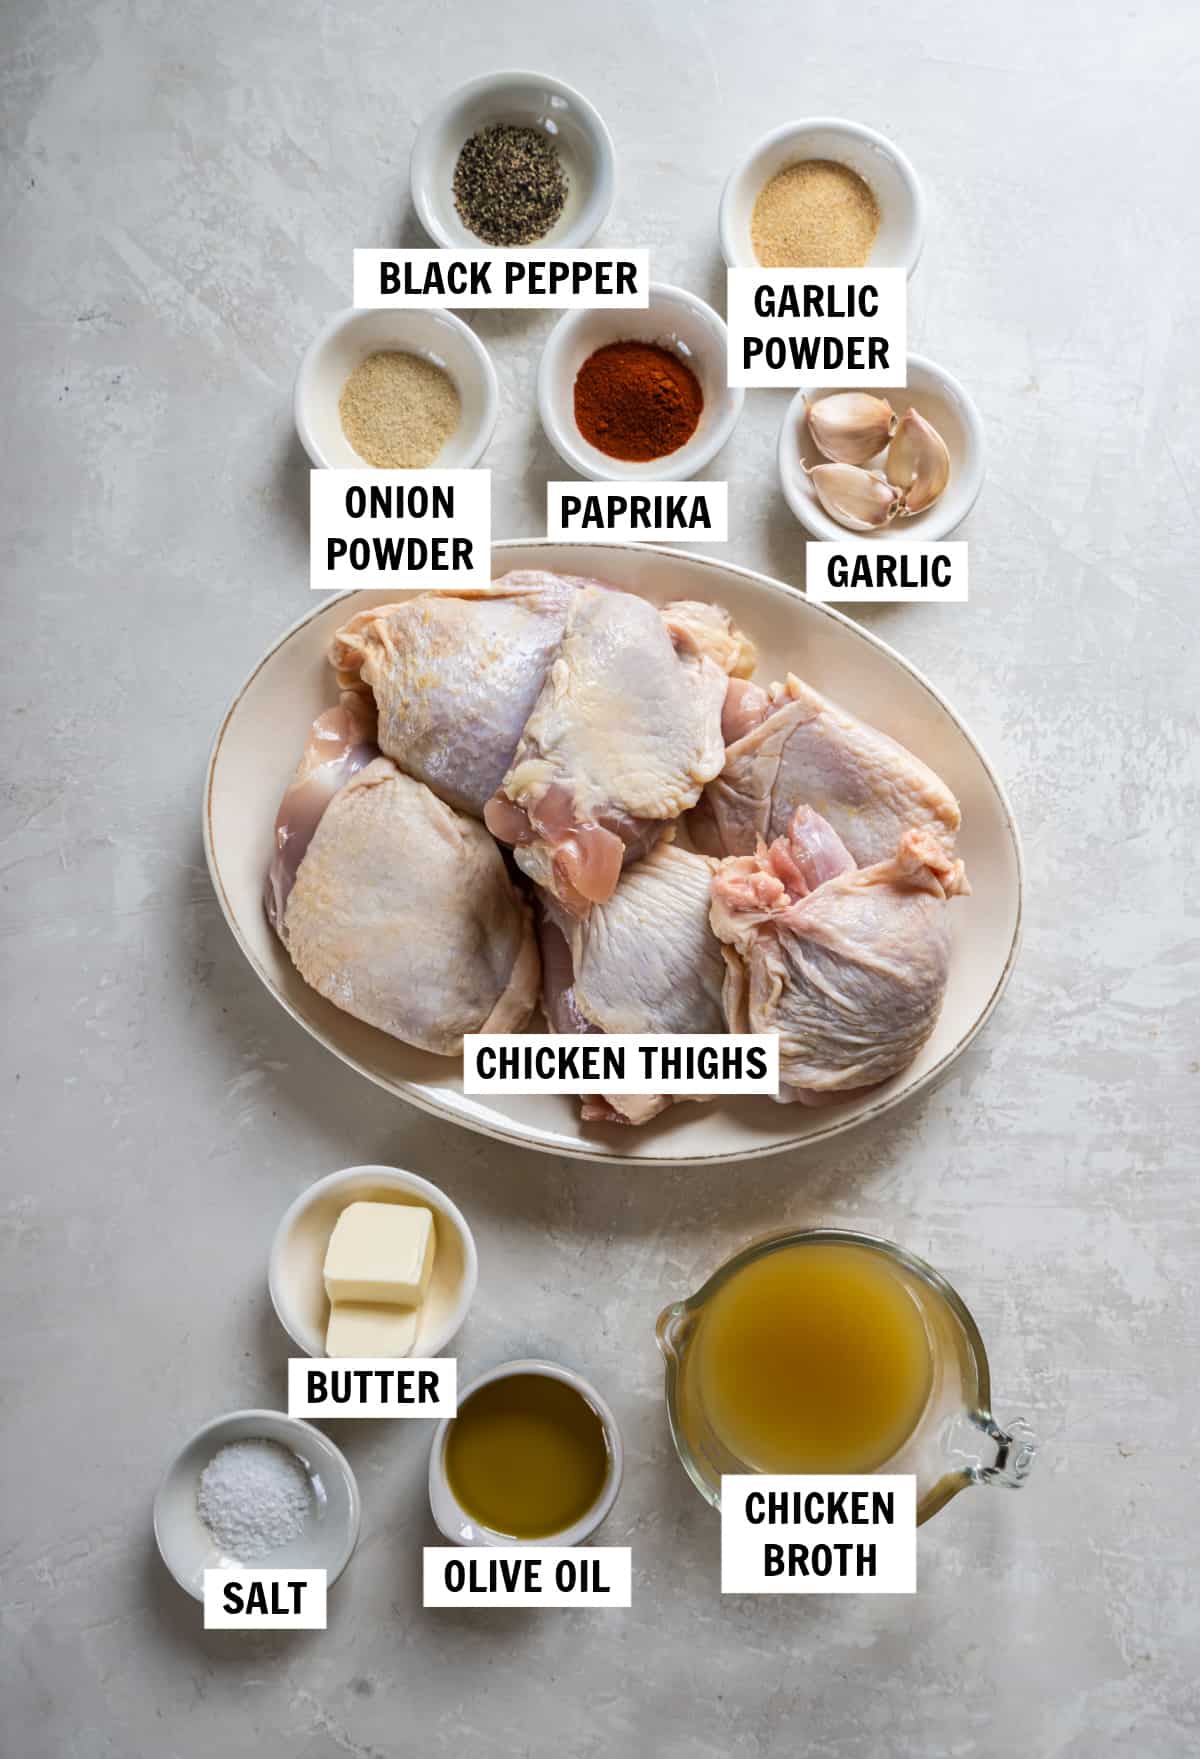 All of the ingredients you need for cast iron chicken thighs including chicken thighs, olive oil, butter, paprika, garlic powder, onion powder, salt, black pepper, garlic and chicken broth.